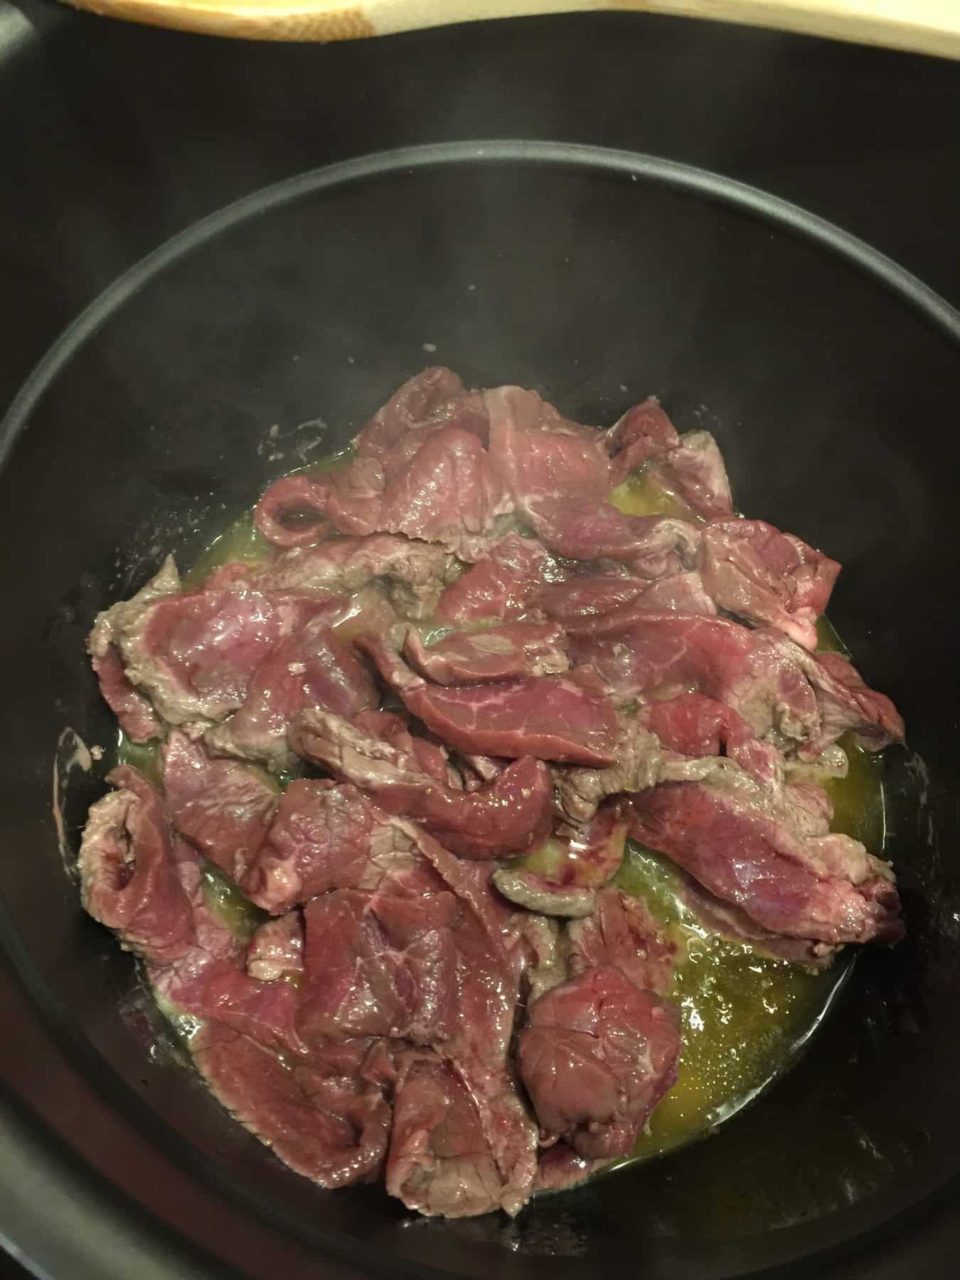 Beef slices browning in the Instant pot for Instant Pot Beef with Broccoli